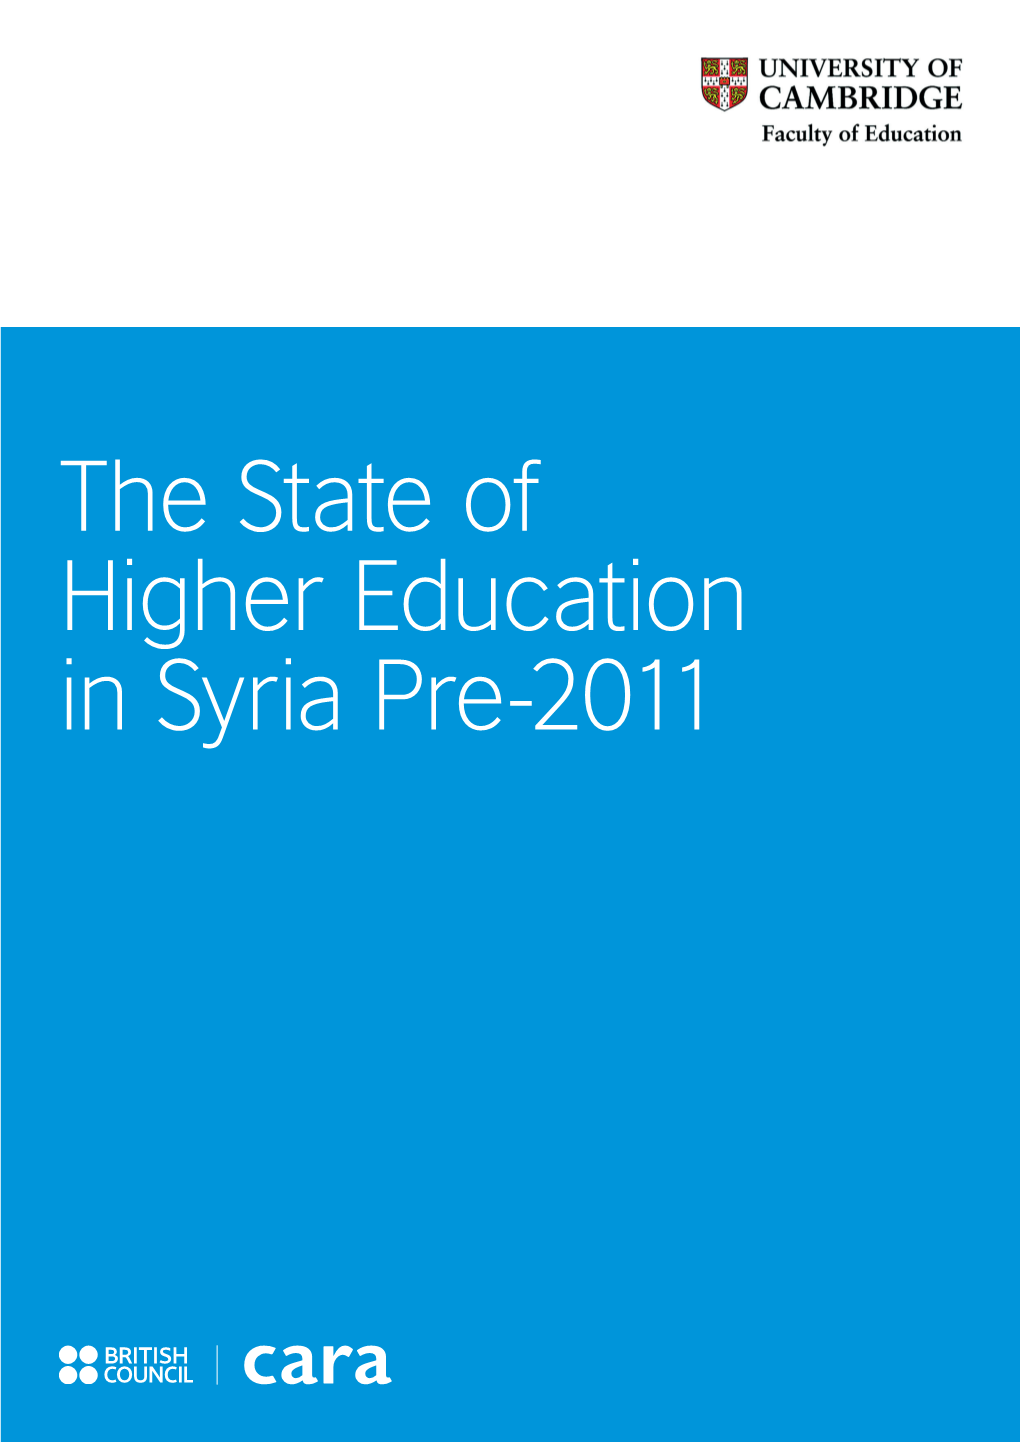 The State of Higher Education in Syria Pre-2011